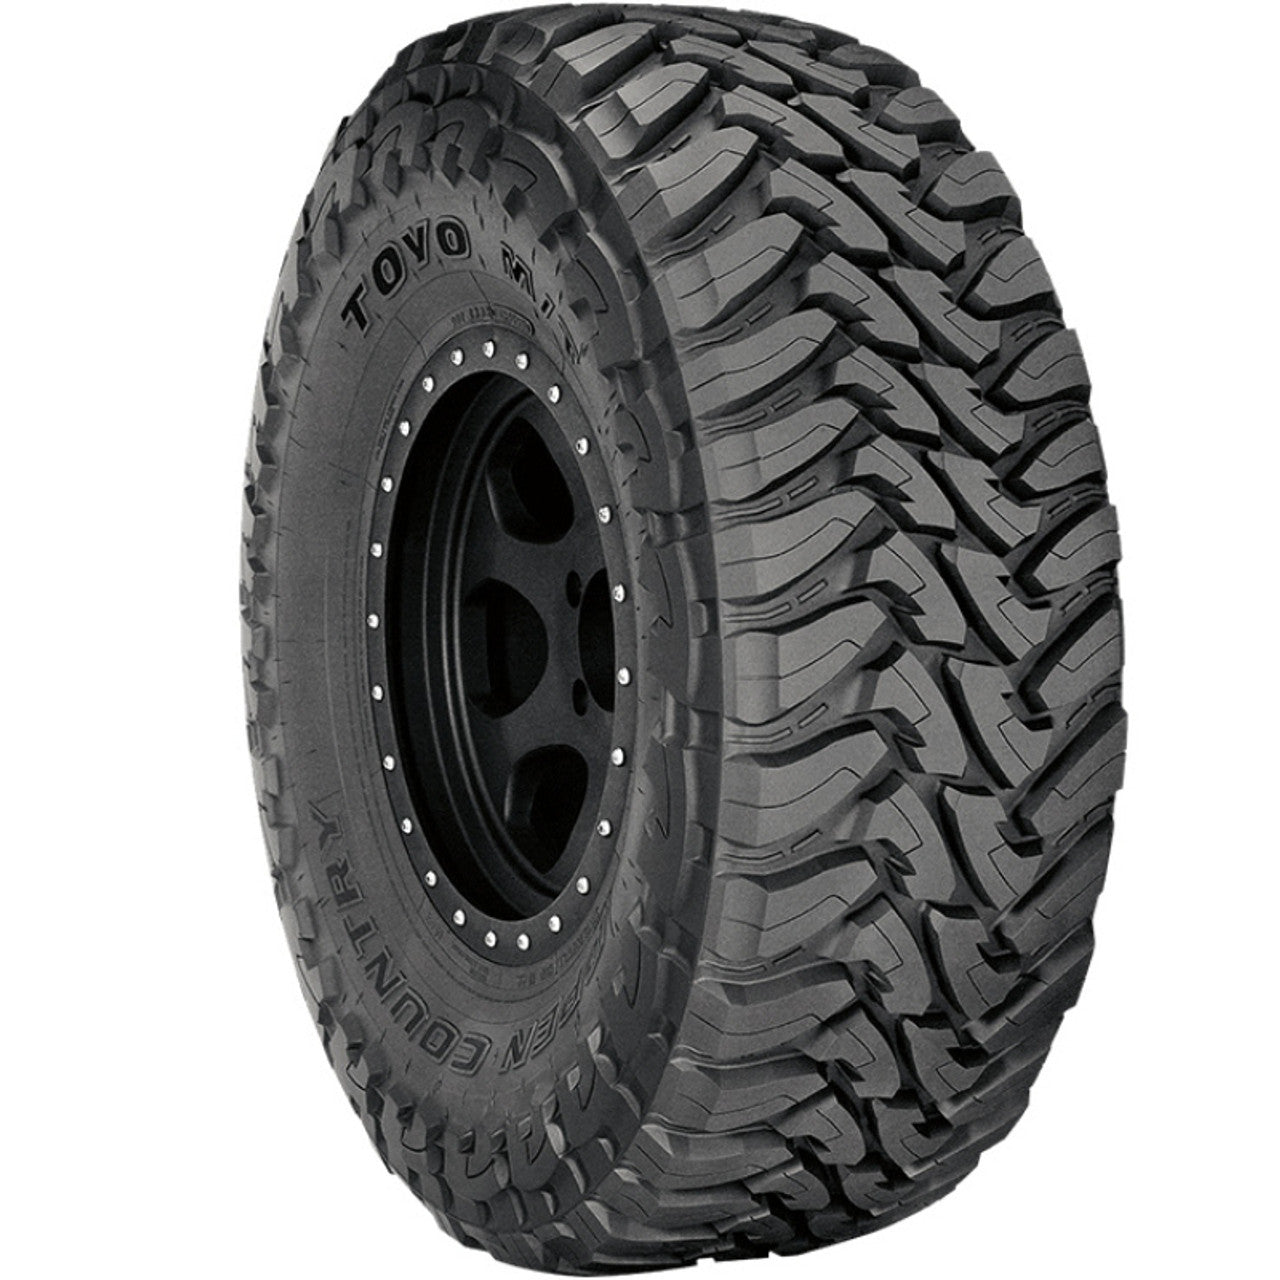 Toyo Open Country Mt - 275/65-18